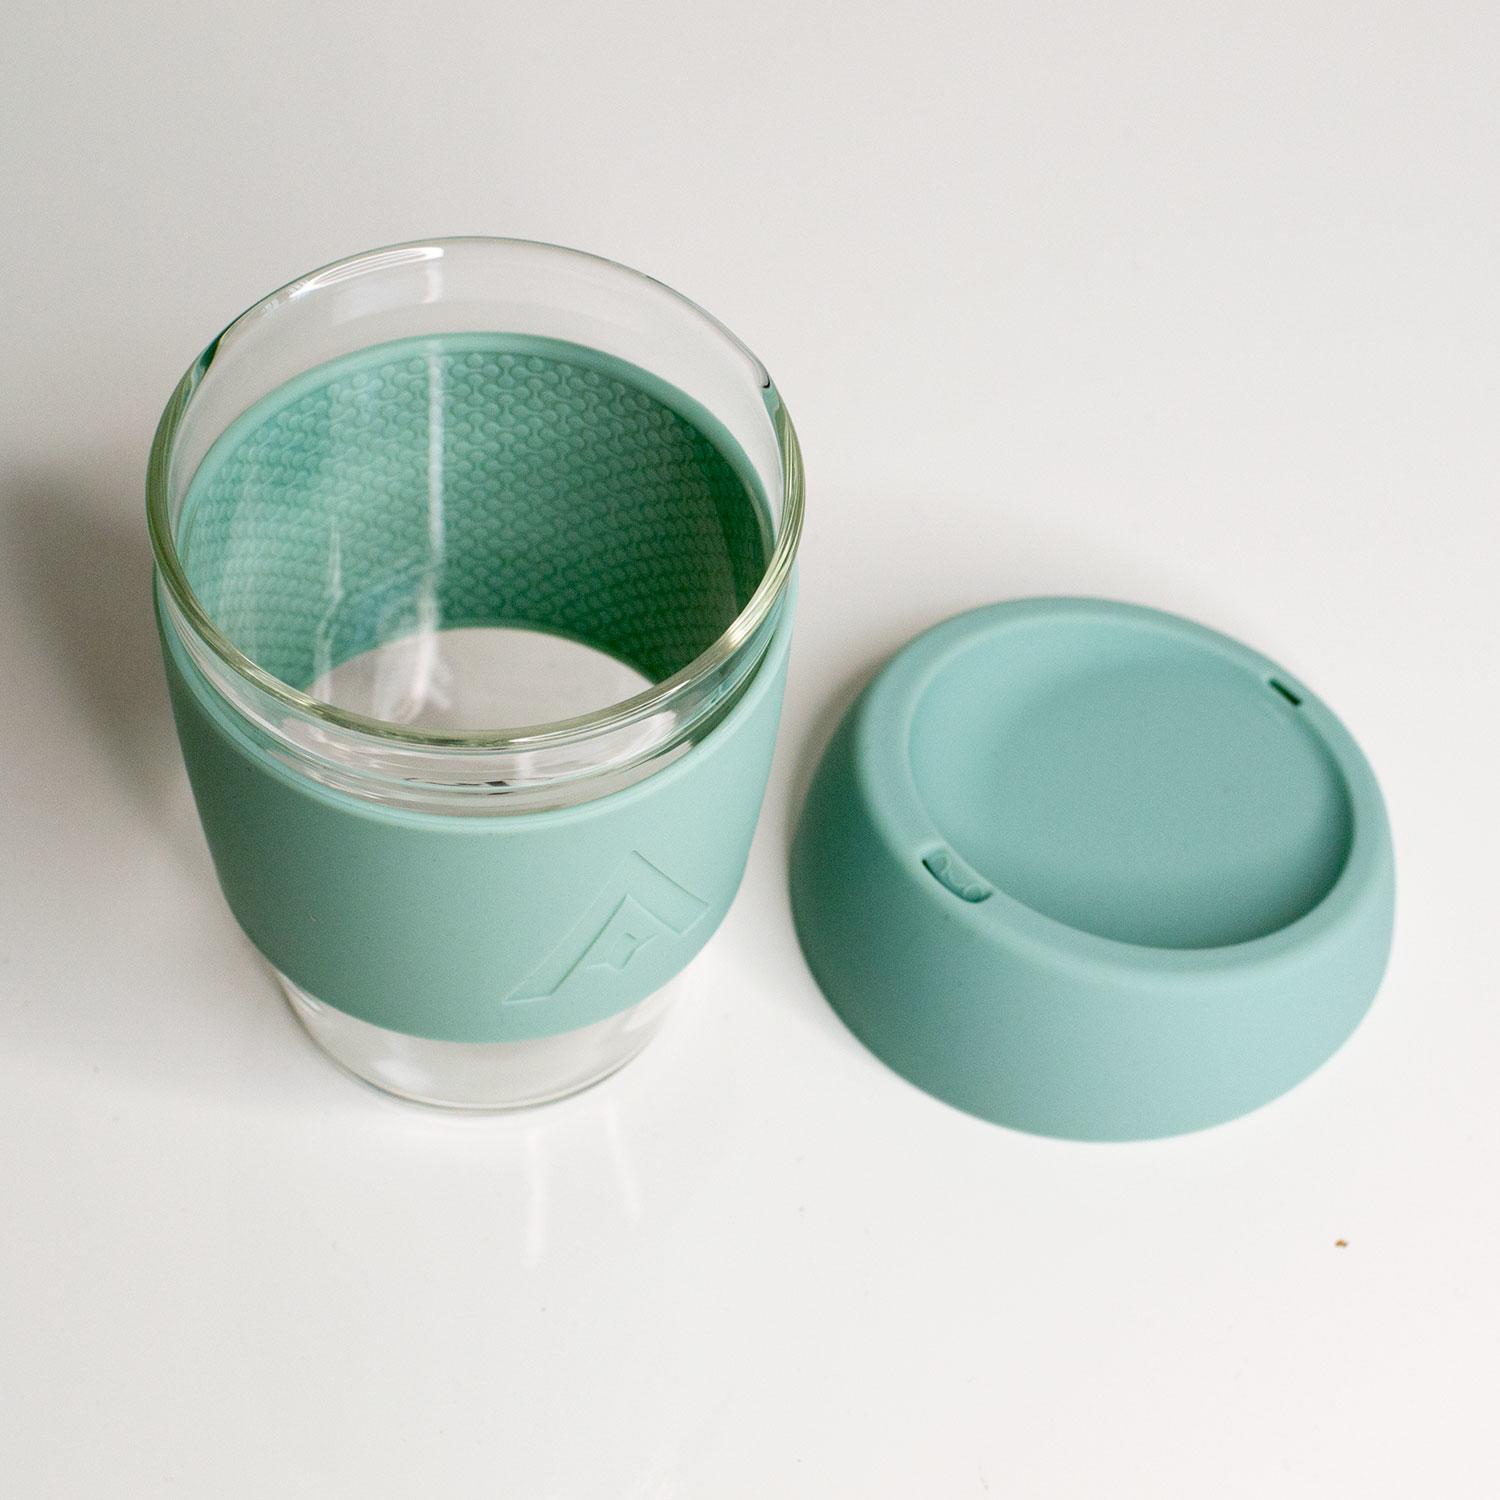 Uberstar Reusable Glass Travel Cup - Sage Green - Only £14.99